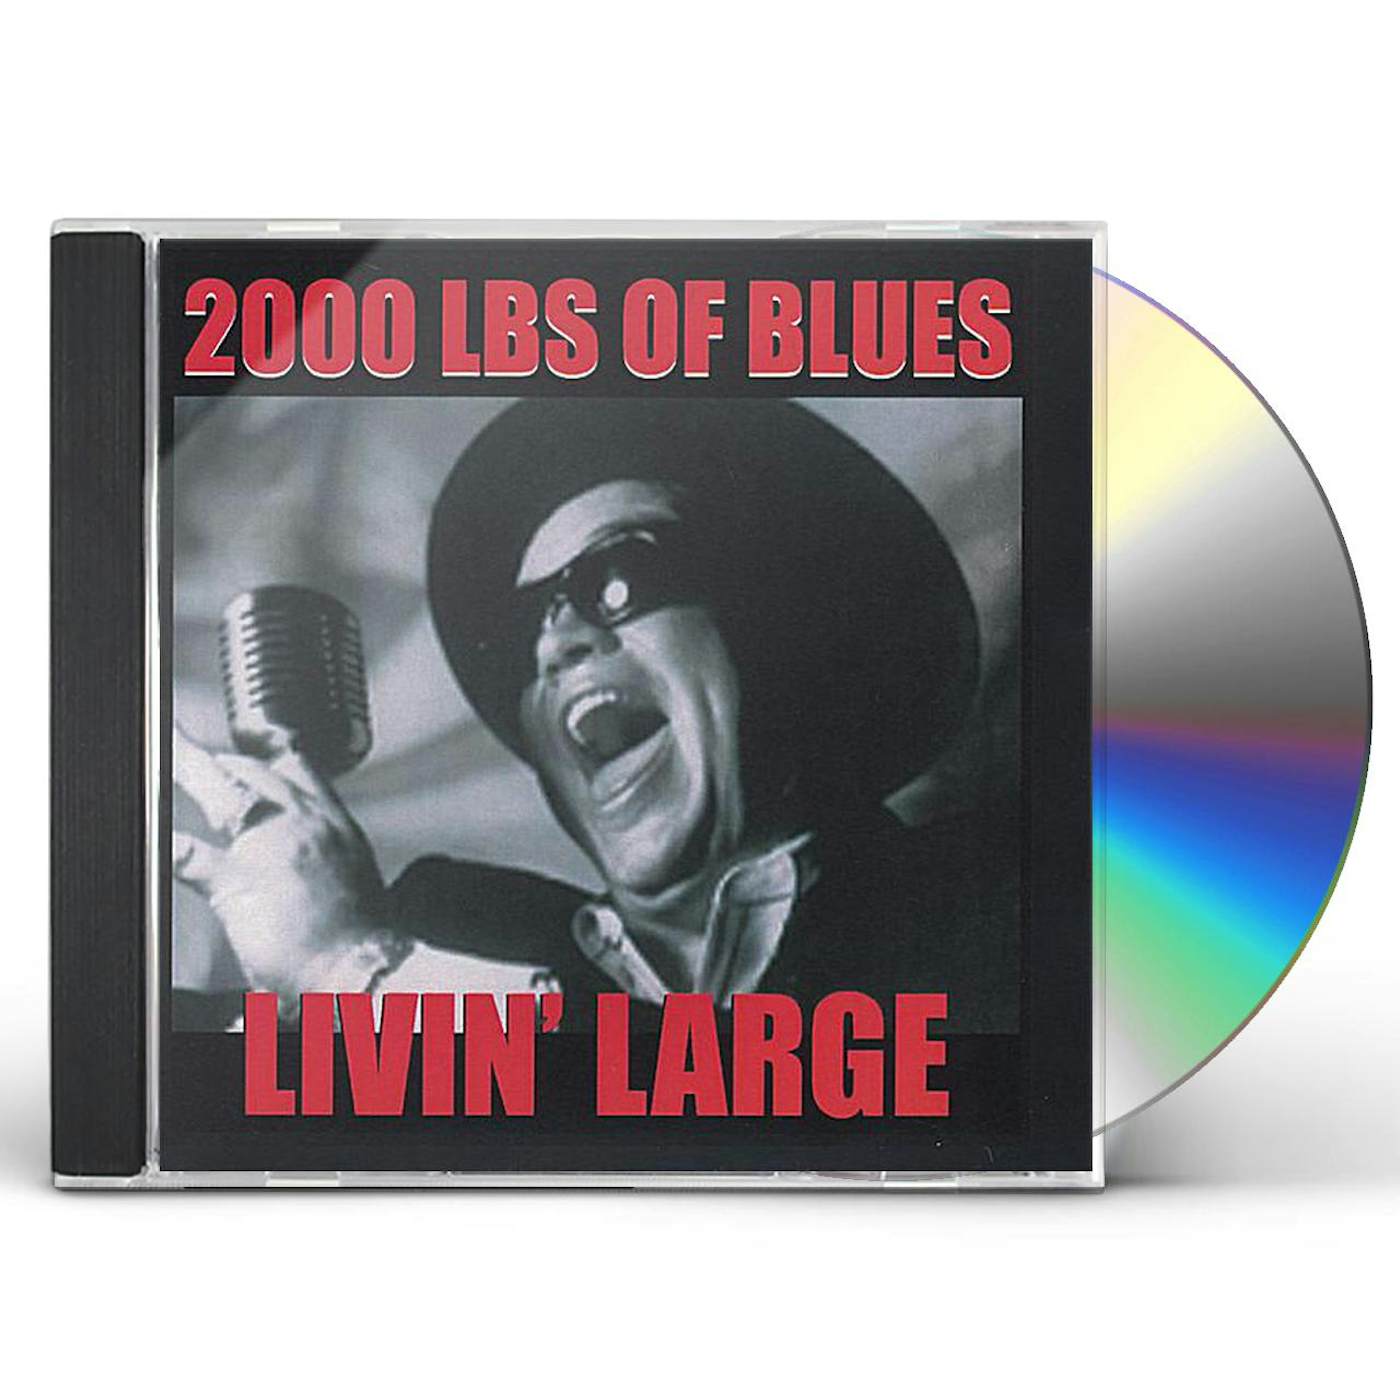 2000 Lbs of Blues LIVIN' LARGE CD